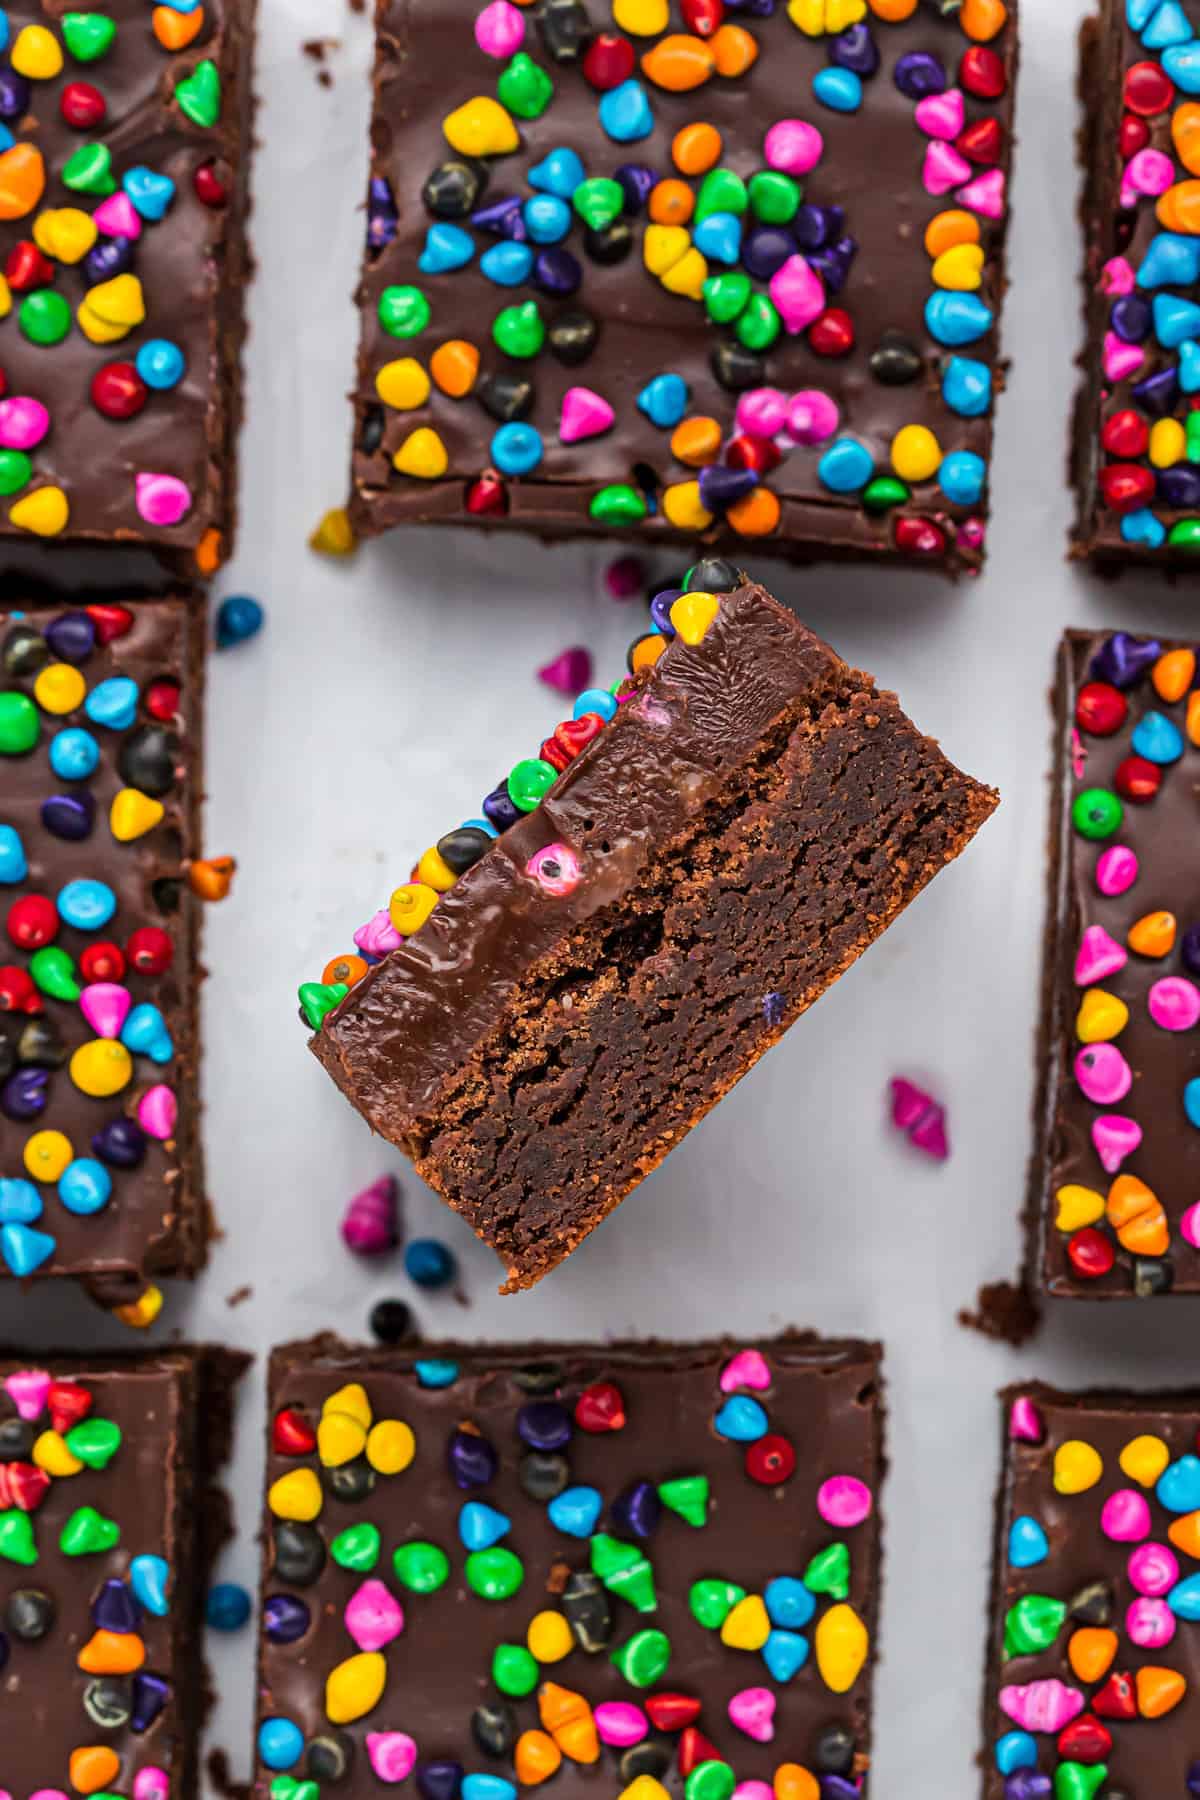 A close up of a cosmic brownie showing the inside brownie texture